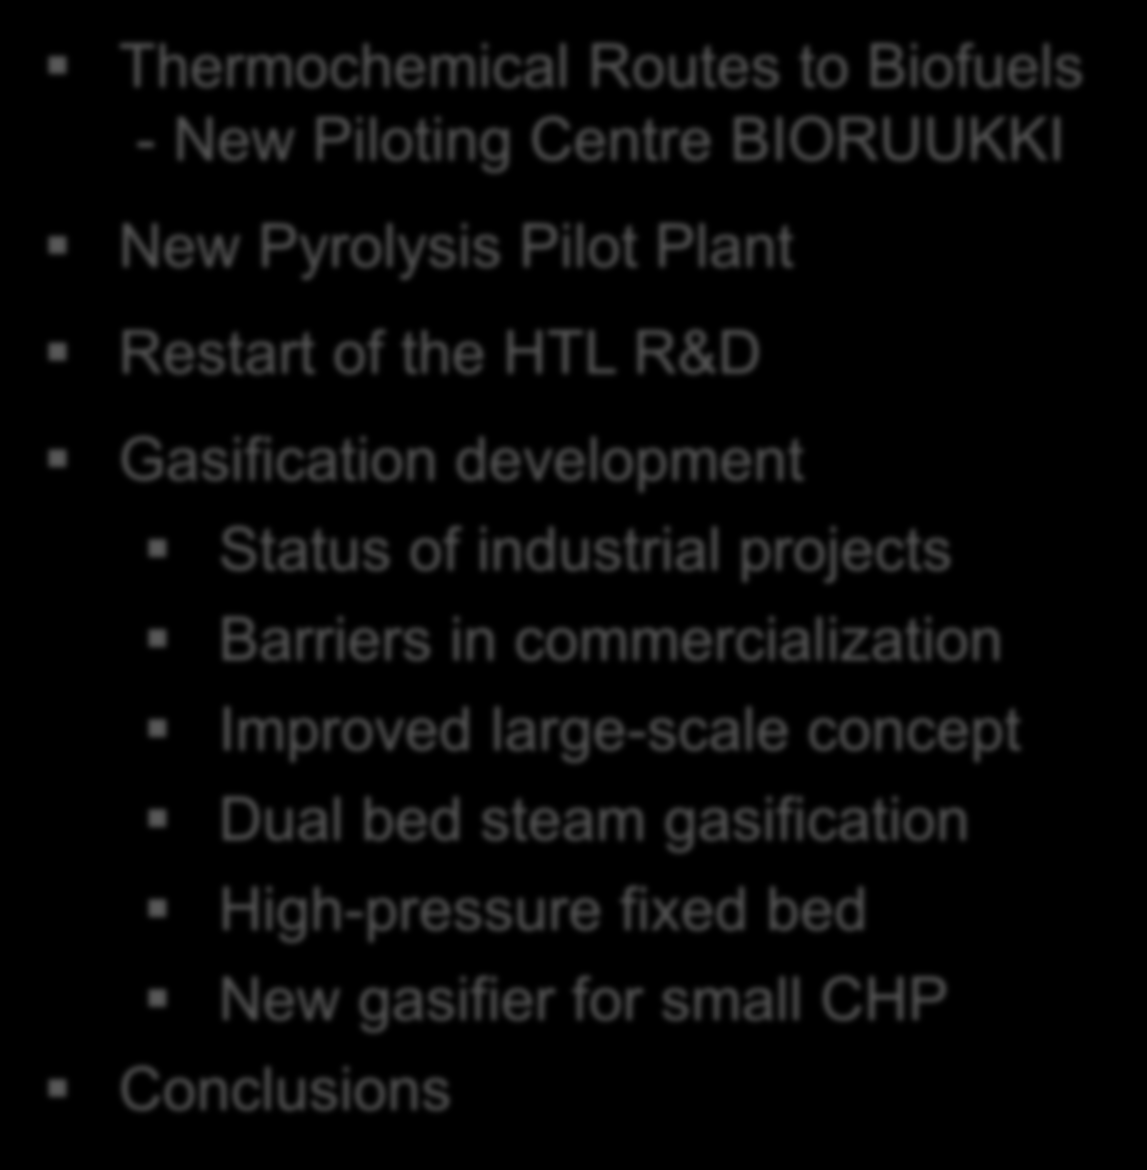 Content of Presentation Thermochemical Routes to Biofuels - New Piloting Centre